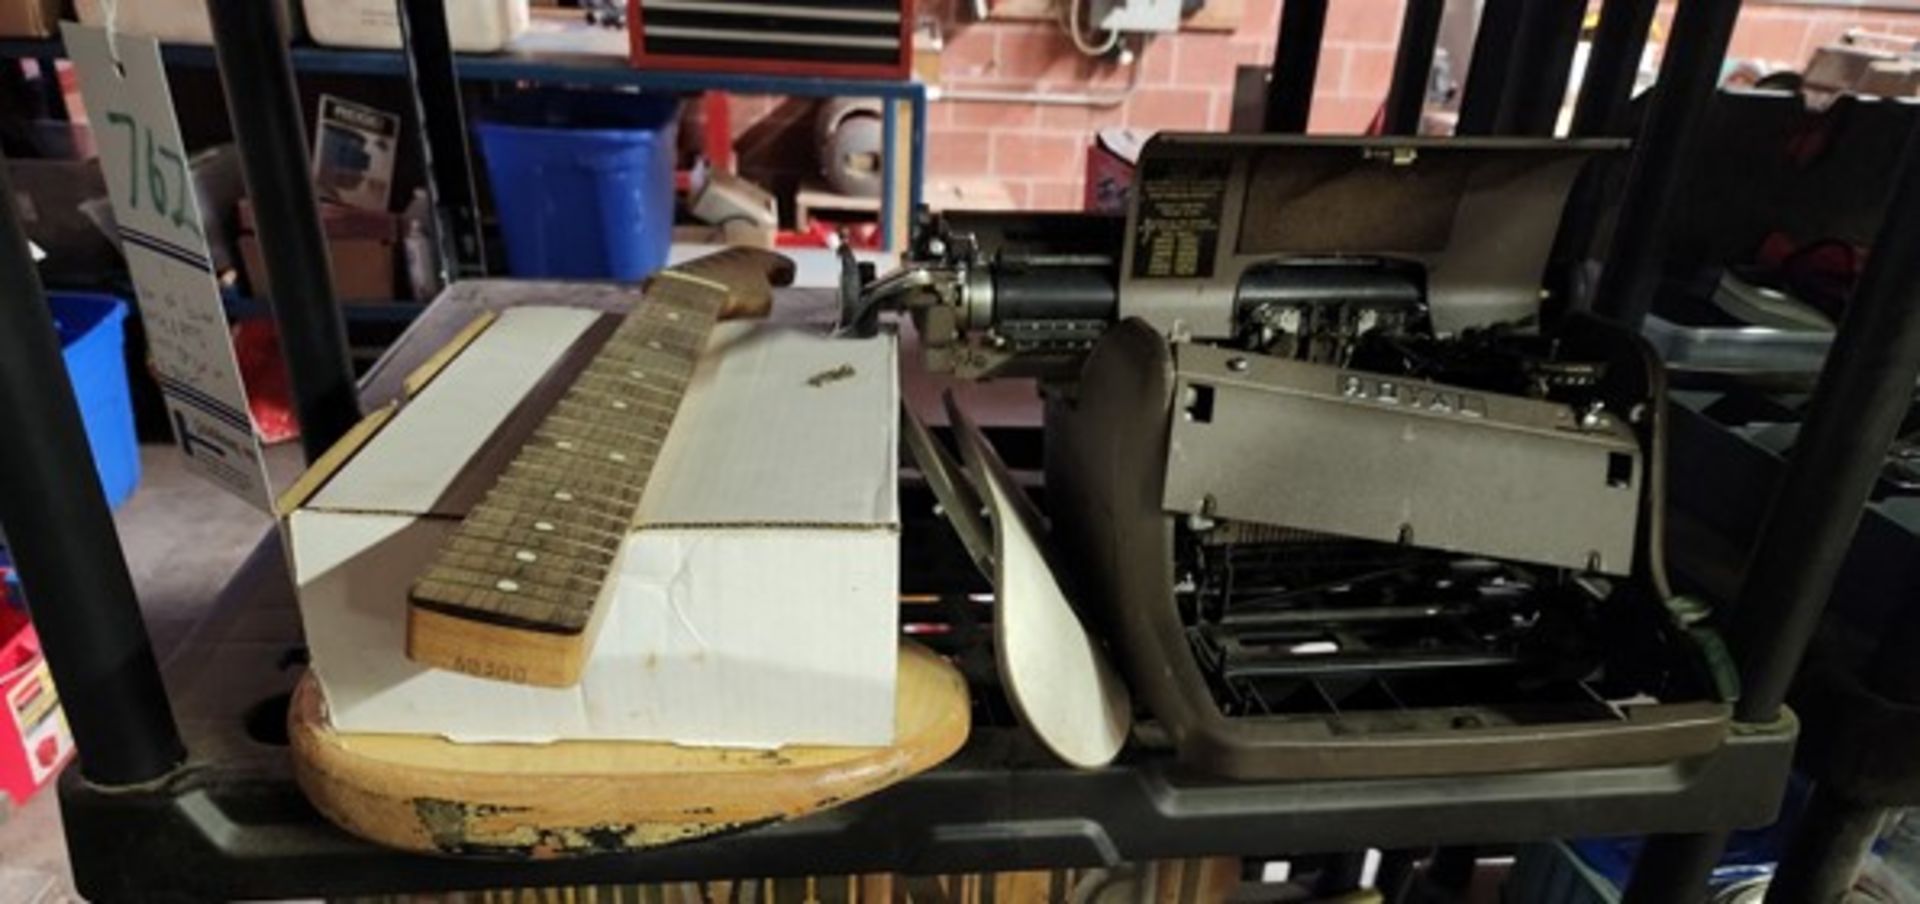 GUITAR AND TYPEWRITER FOR PARTS / ART CRAFTING